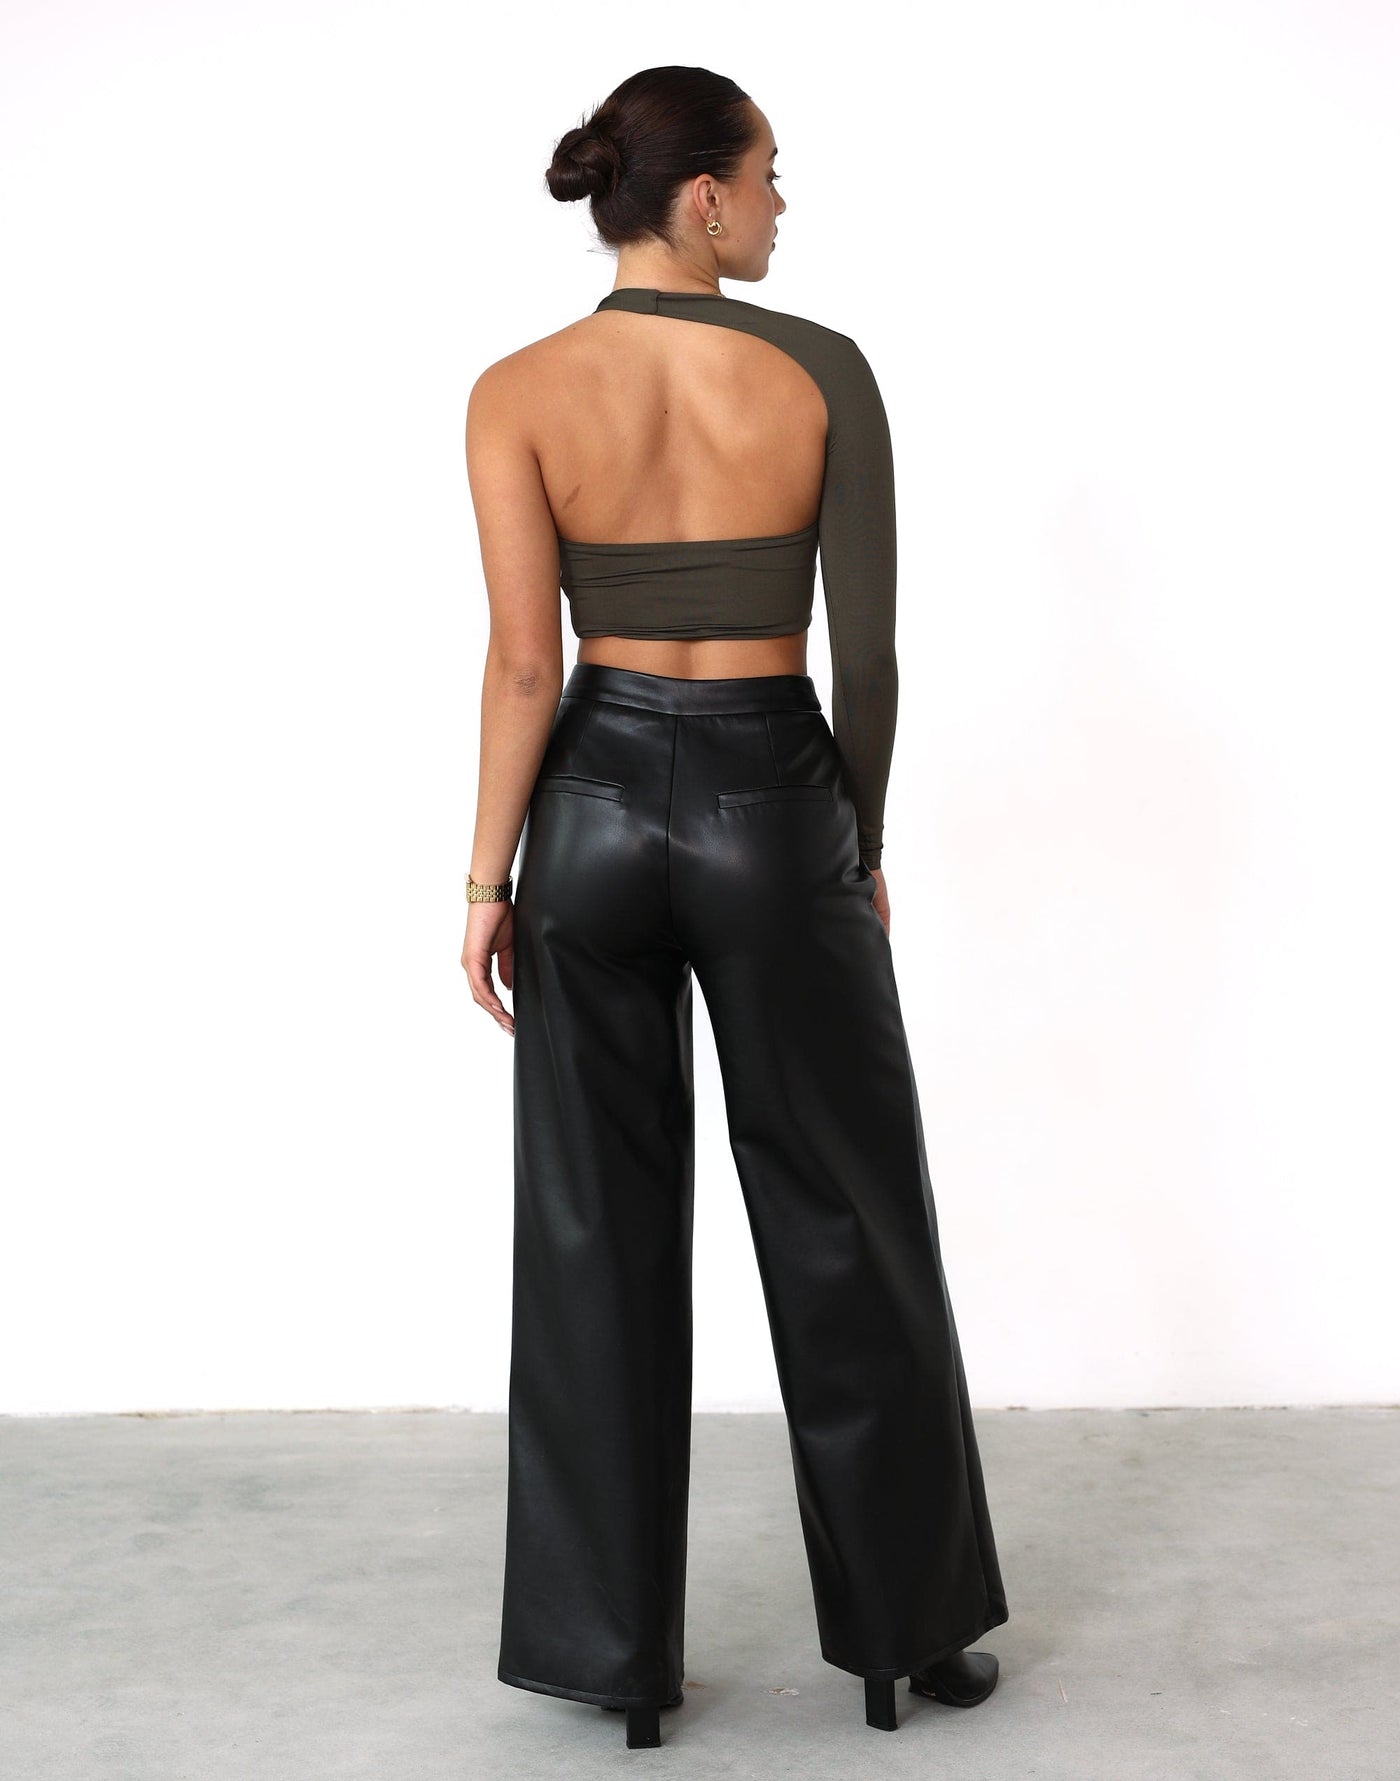 Ryleigh Crop Top (Burnt Olive) - One Sleeve Open Back Top - Women's Top - Charcoal Clothing